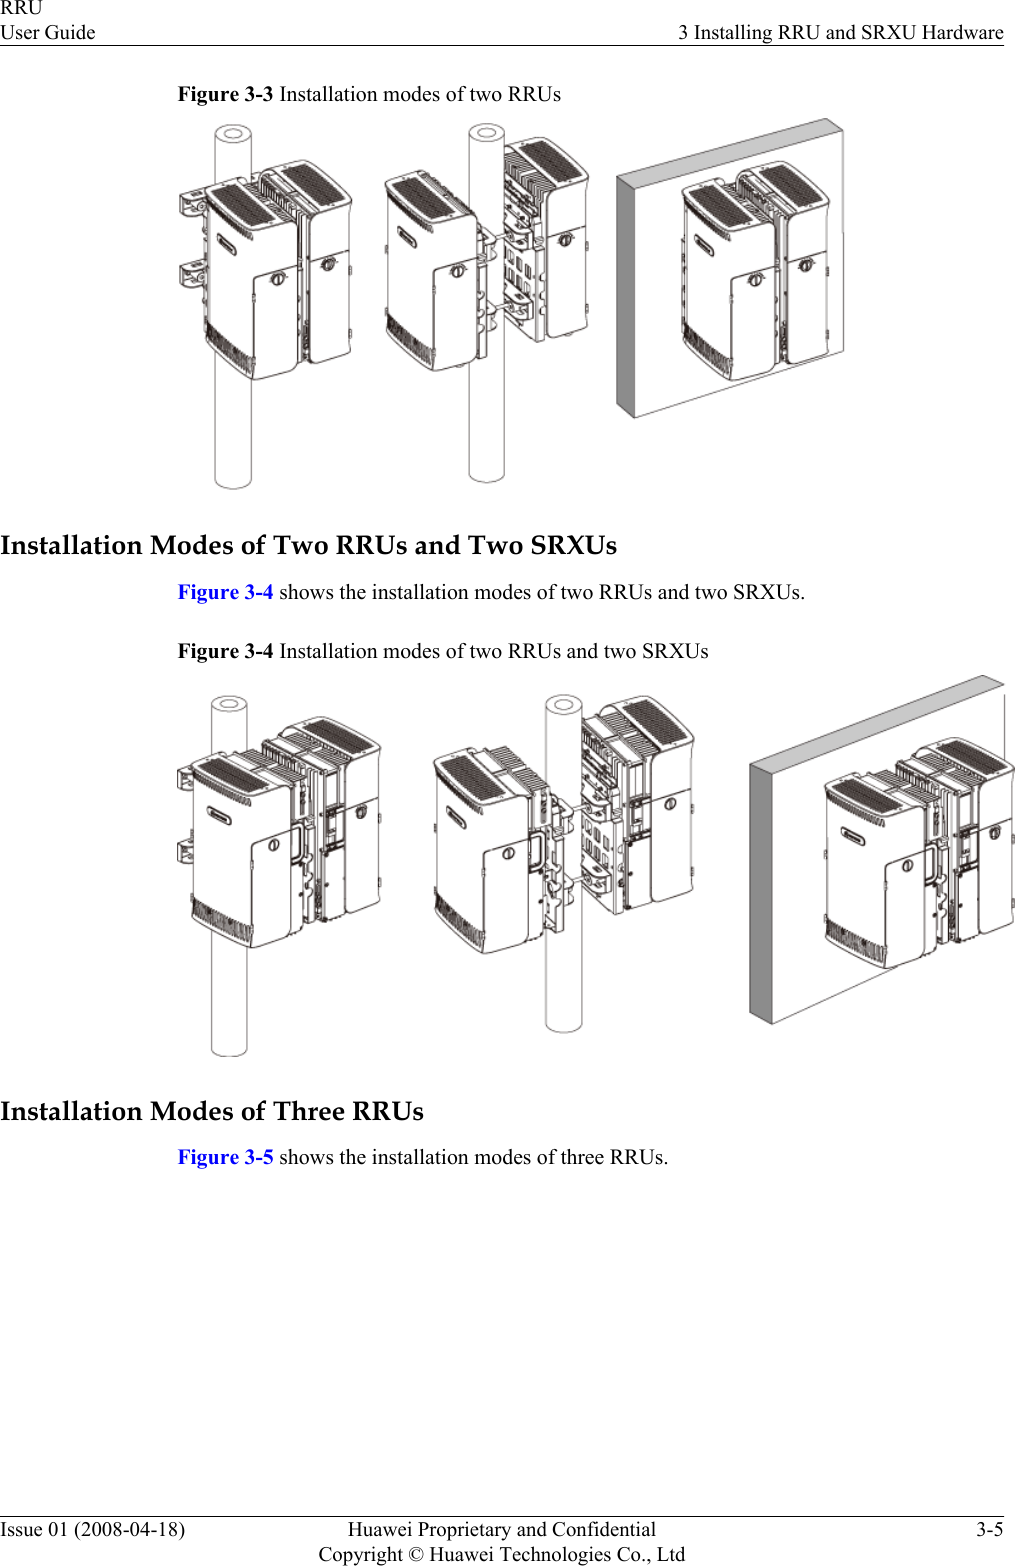 Figure 3-3 Installation modes of two RRUsInstallation Modes of Two RRUs and Two SRXUsFigure 3-4 shows the installation modes of two RRUs and two SRXUs.Figure 3-4 Installation modes of two RRUs and two SRXUsInstallation Modes of Three RRUsFigure 3-5 shows the installation modes of three RRUs.RRUUser Guide 3 Installing RRU and SRXU HardwareIssue 01 (2008-04-18) Huawei Proprietary and ConfidentialCopyright © Huawei Technologies Co., Ltd3-5